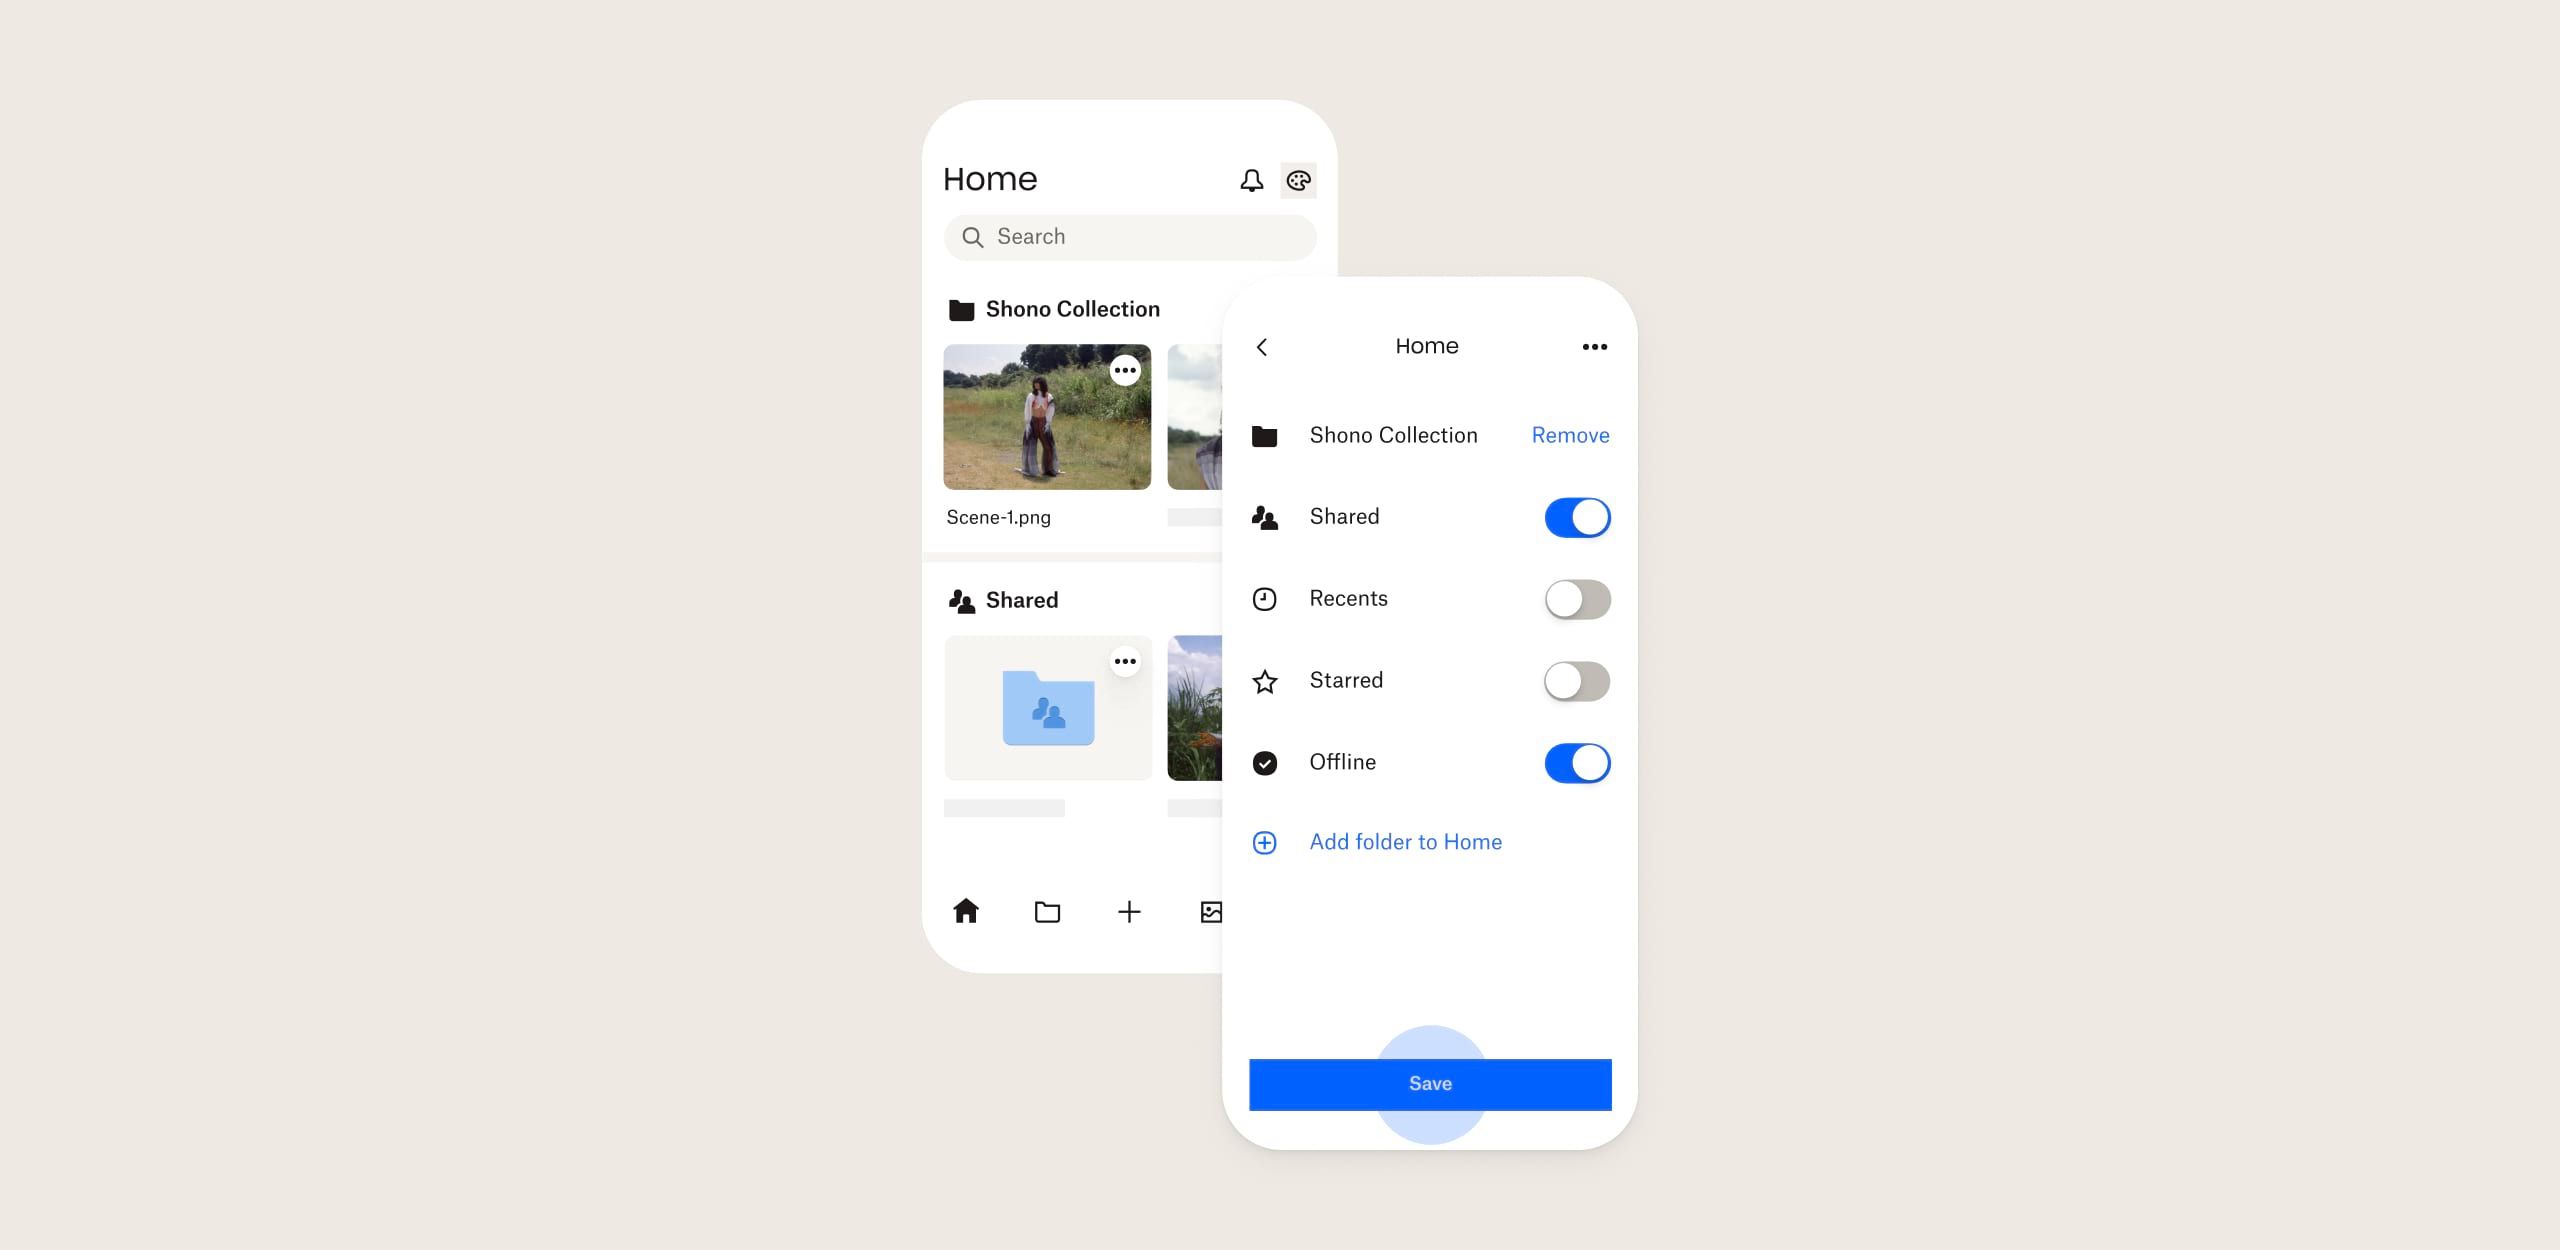 Updated Dropbox iOS interface with shared and offline buttons enabled